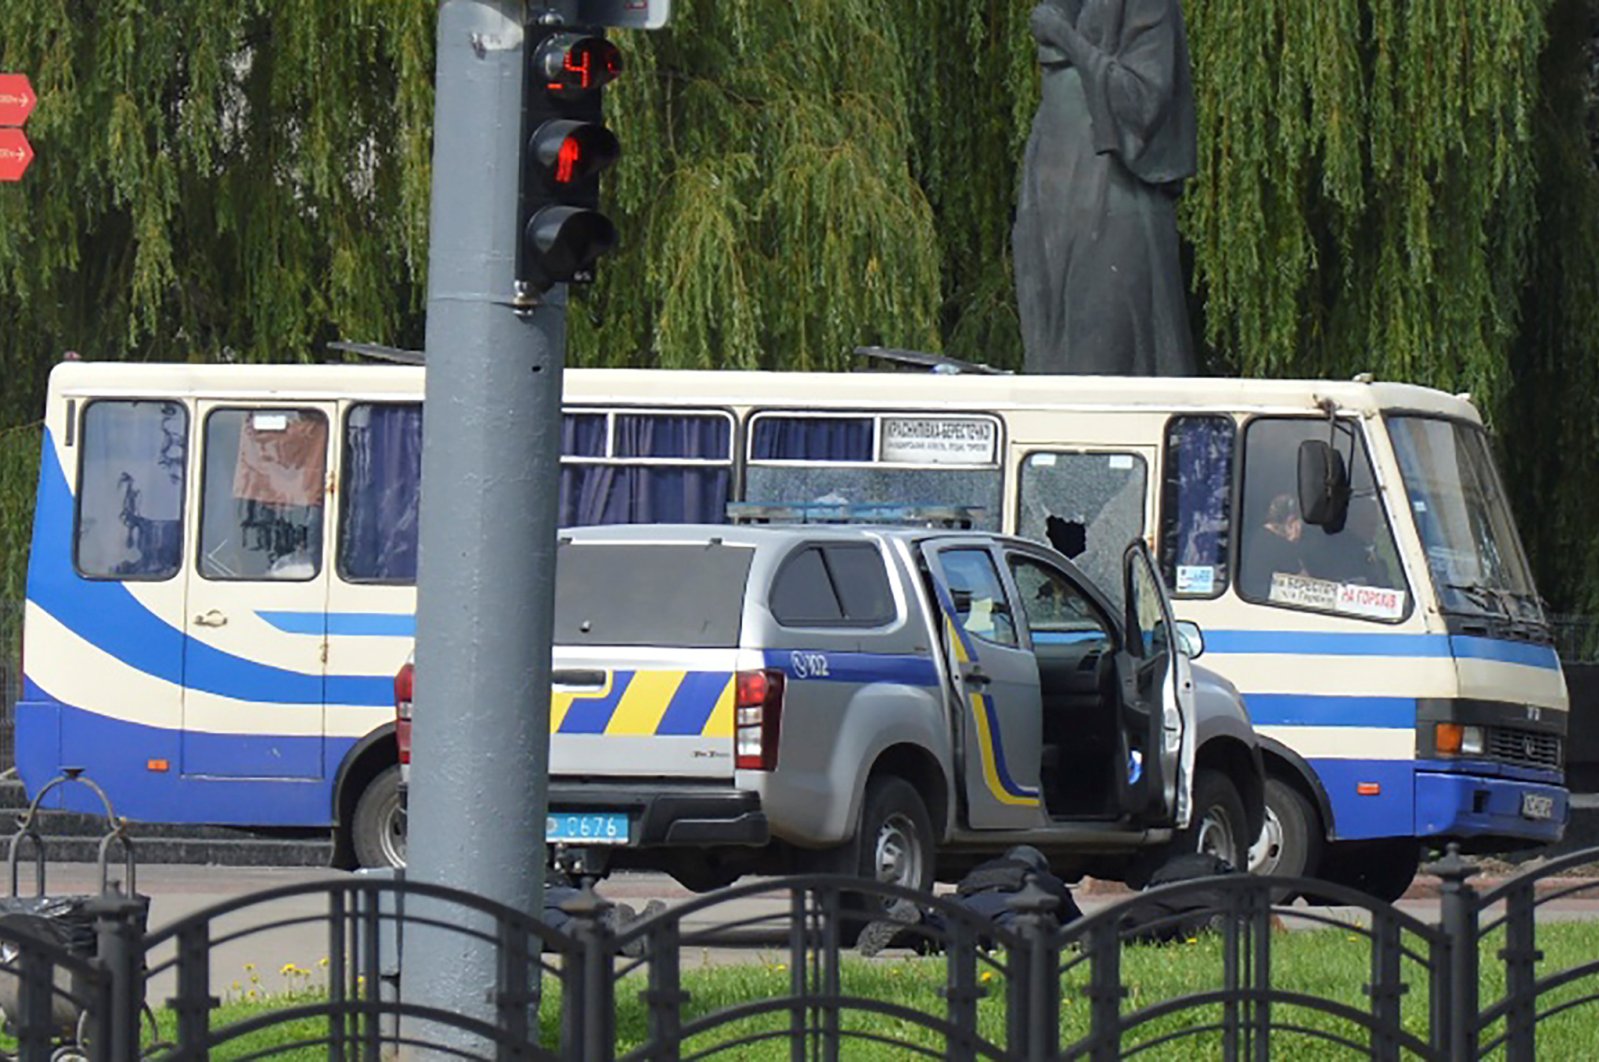 Ukrainian law enforcement officers lie on the ground behind a car near a passenger bus, which was seized by an unidentified person in the city of Lutsk, Ukraine July 21, 2020. (Reuters Photo)